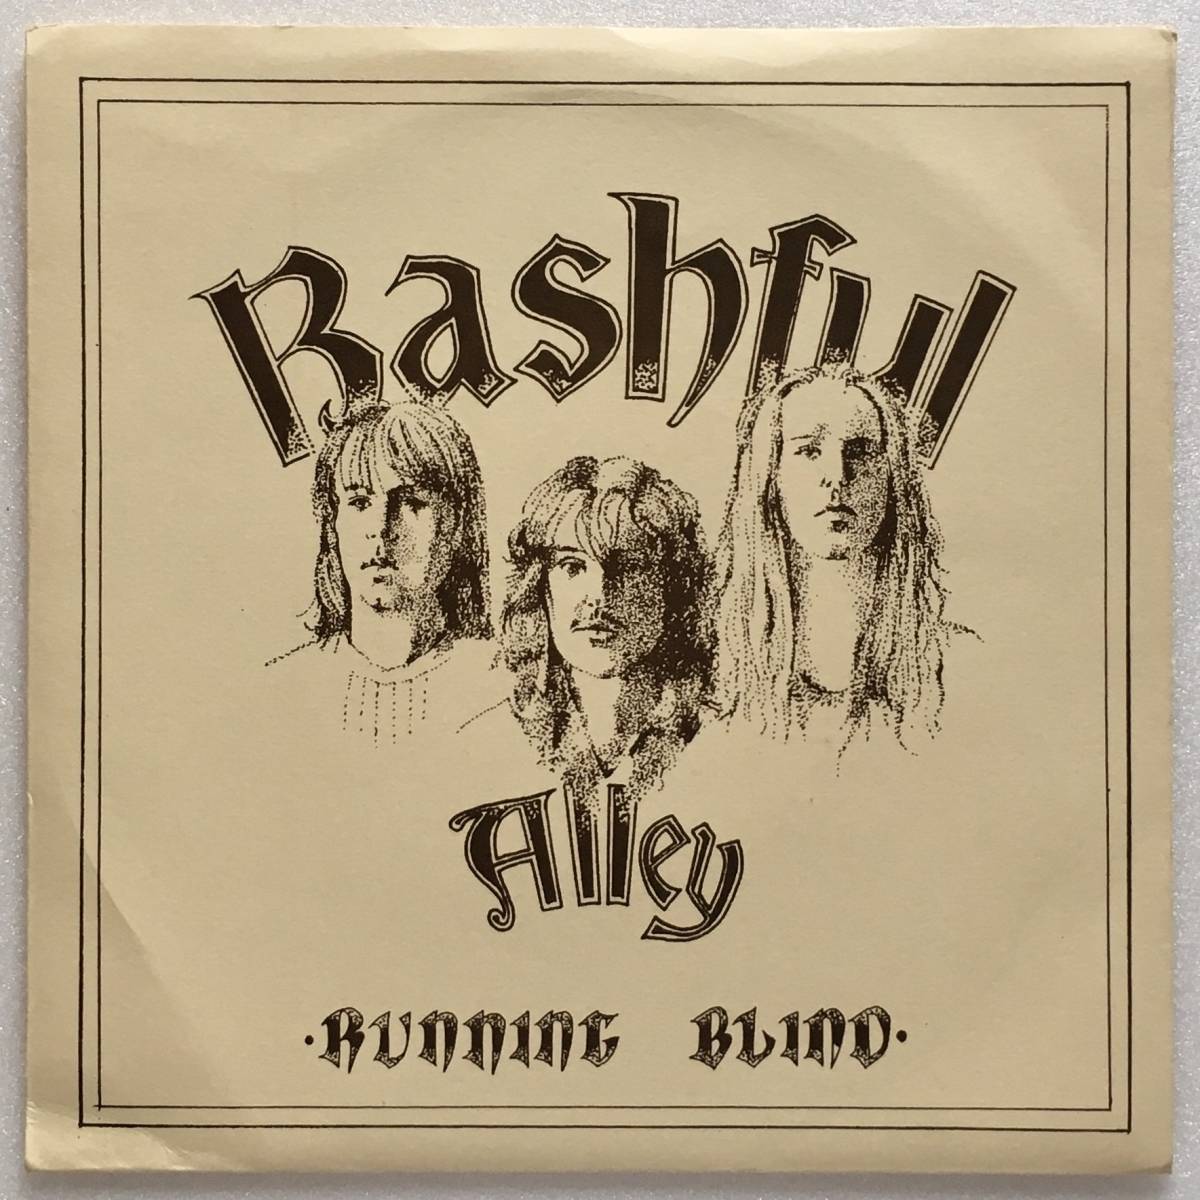 BASHFUL ALLEY「RUNNING BLIND」UK ORIGINAL GRAFFITI BA001 '82 MEGA RARE NWOBHM 7INCH SINGLE with A PICTURE SLEEVE THEIR ONLY ISSUED